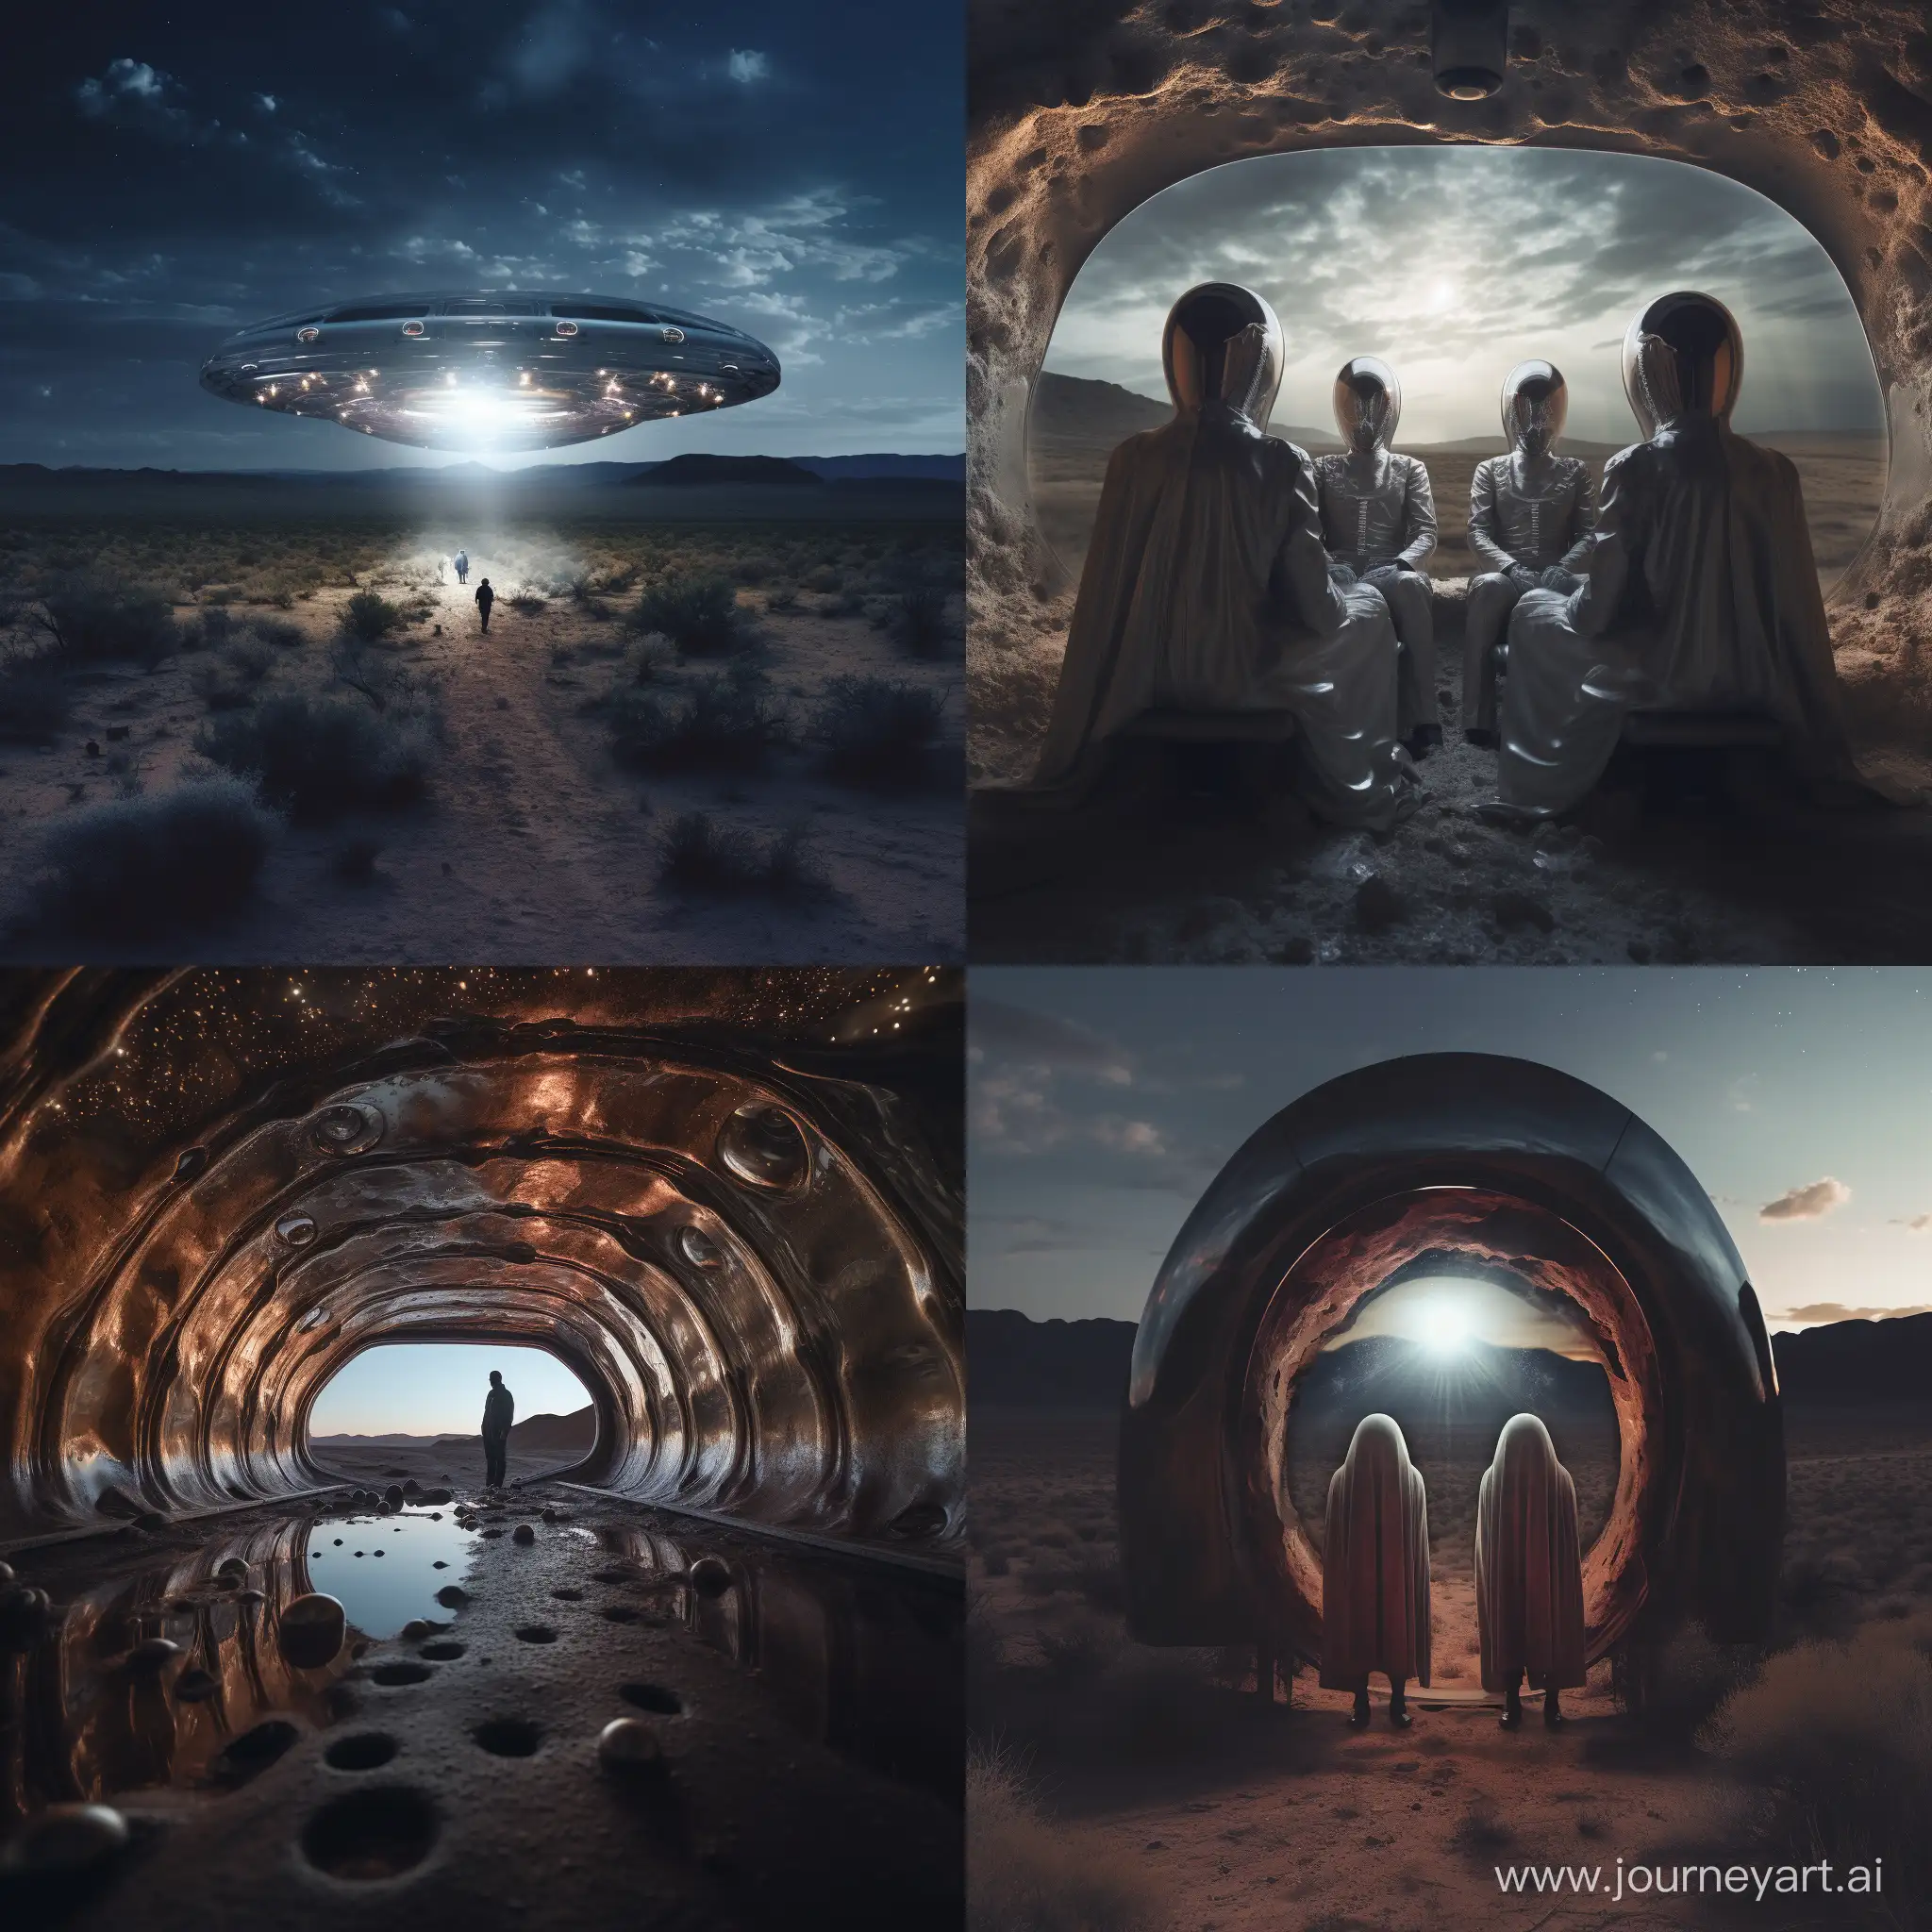 Ethereal-Specters-Mysterious-Space-Beings-Haunting-an-Abandoned-Spaceship